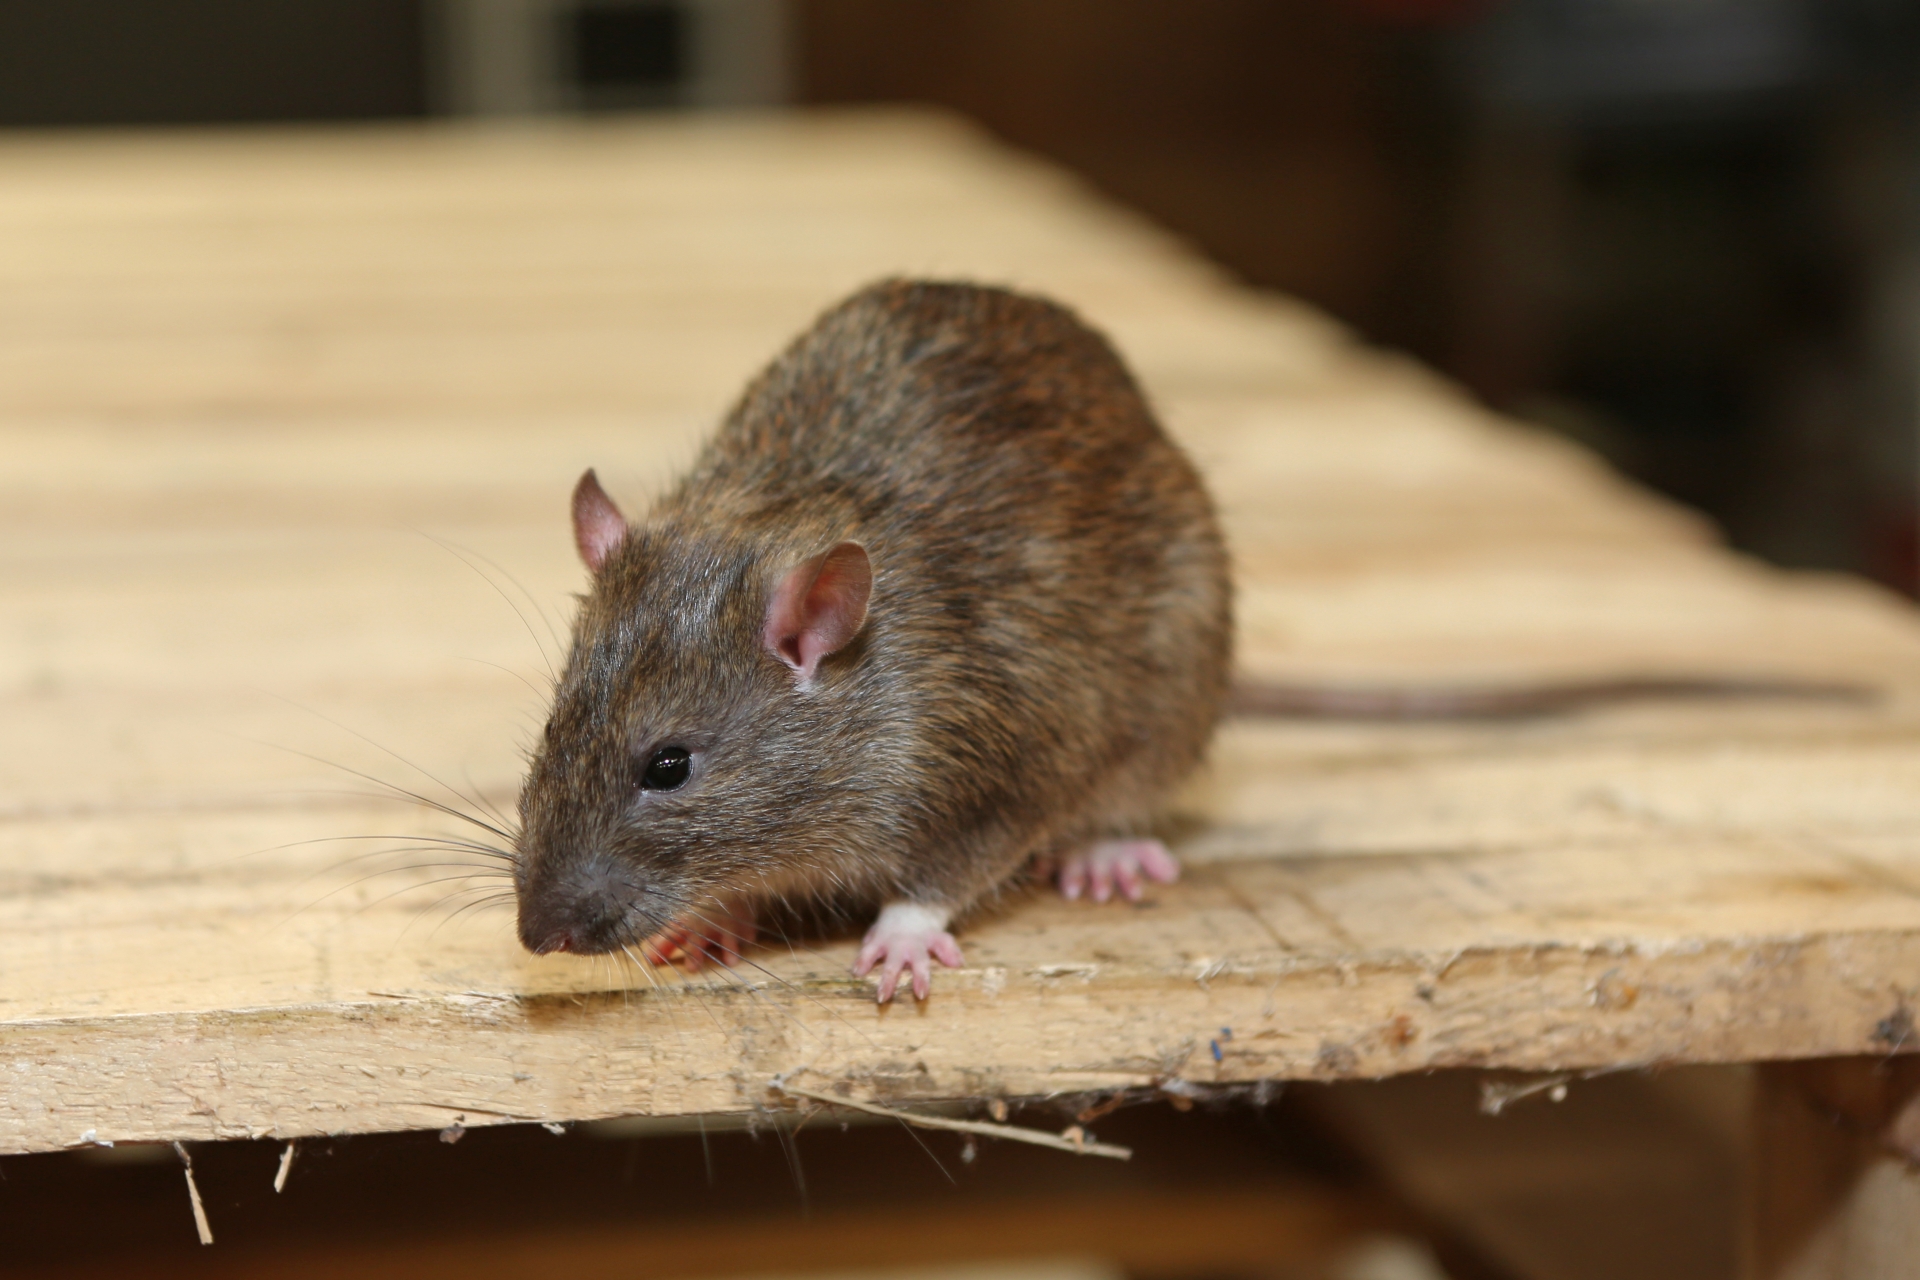 Rat extermination, Pest Control in Streatham, SW16. Call Now 020 8166 9746